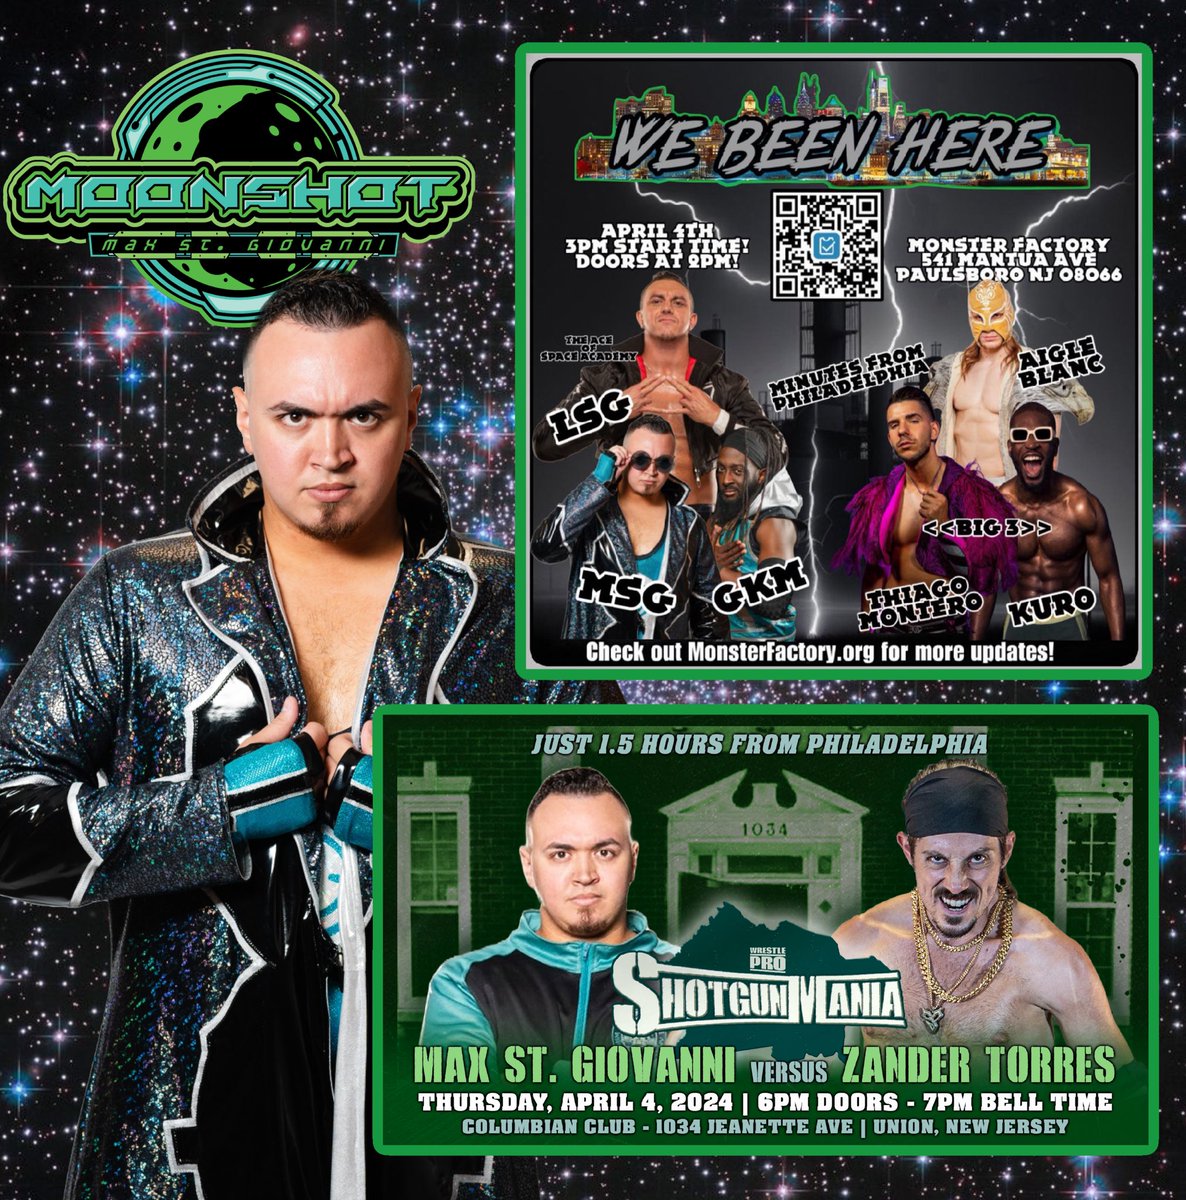 It’s a DOUBLE SHOT of MOONSHOT!!! 

Tomorrow, the #StGiovanniBros return to @4MonsterFactory when the entire #AceOfSpaceAcademy competes in Tag-Team action!

Then, I battle in singles action against one half of the #RatBastards, @ZanderTorresPro, at @WrestlePro’s #ShotgunMania!!!